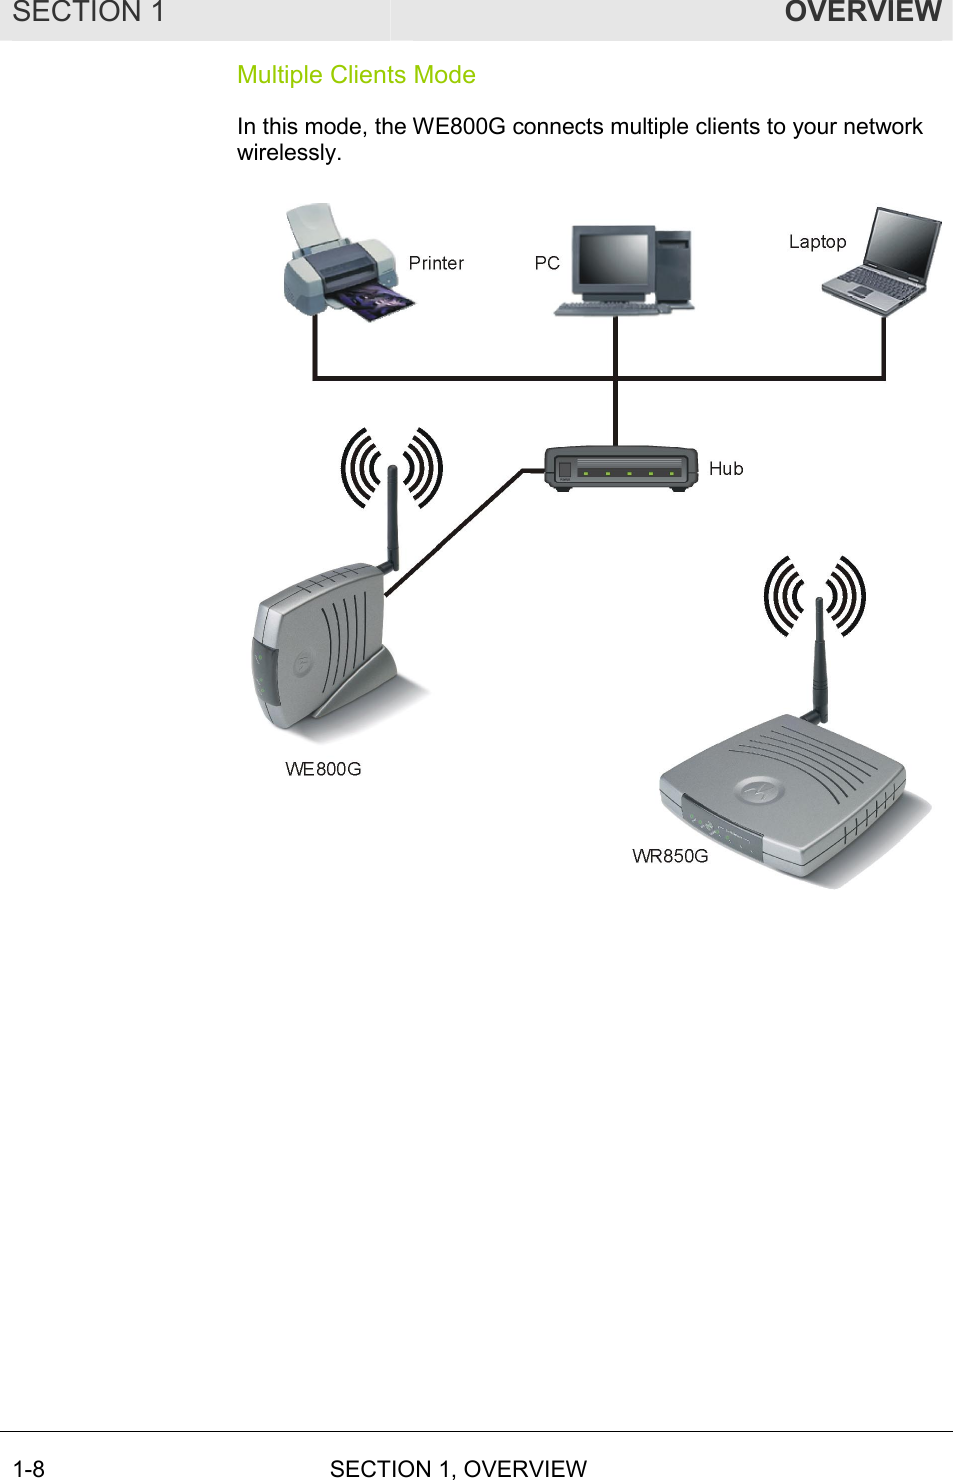 SECTION 1  OVERVIEW 1-8 SECTION 1, OVERVIEW  Multiple Clients Mode In this mode, the WE800G connects multiple clients to your network wirelessly.   